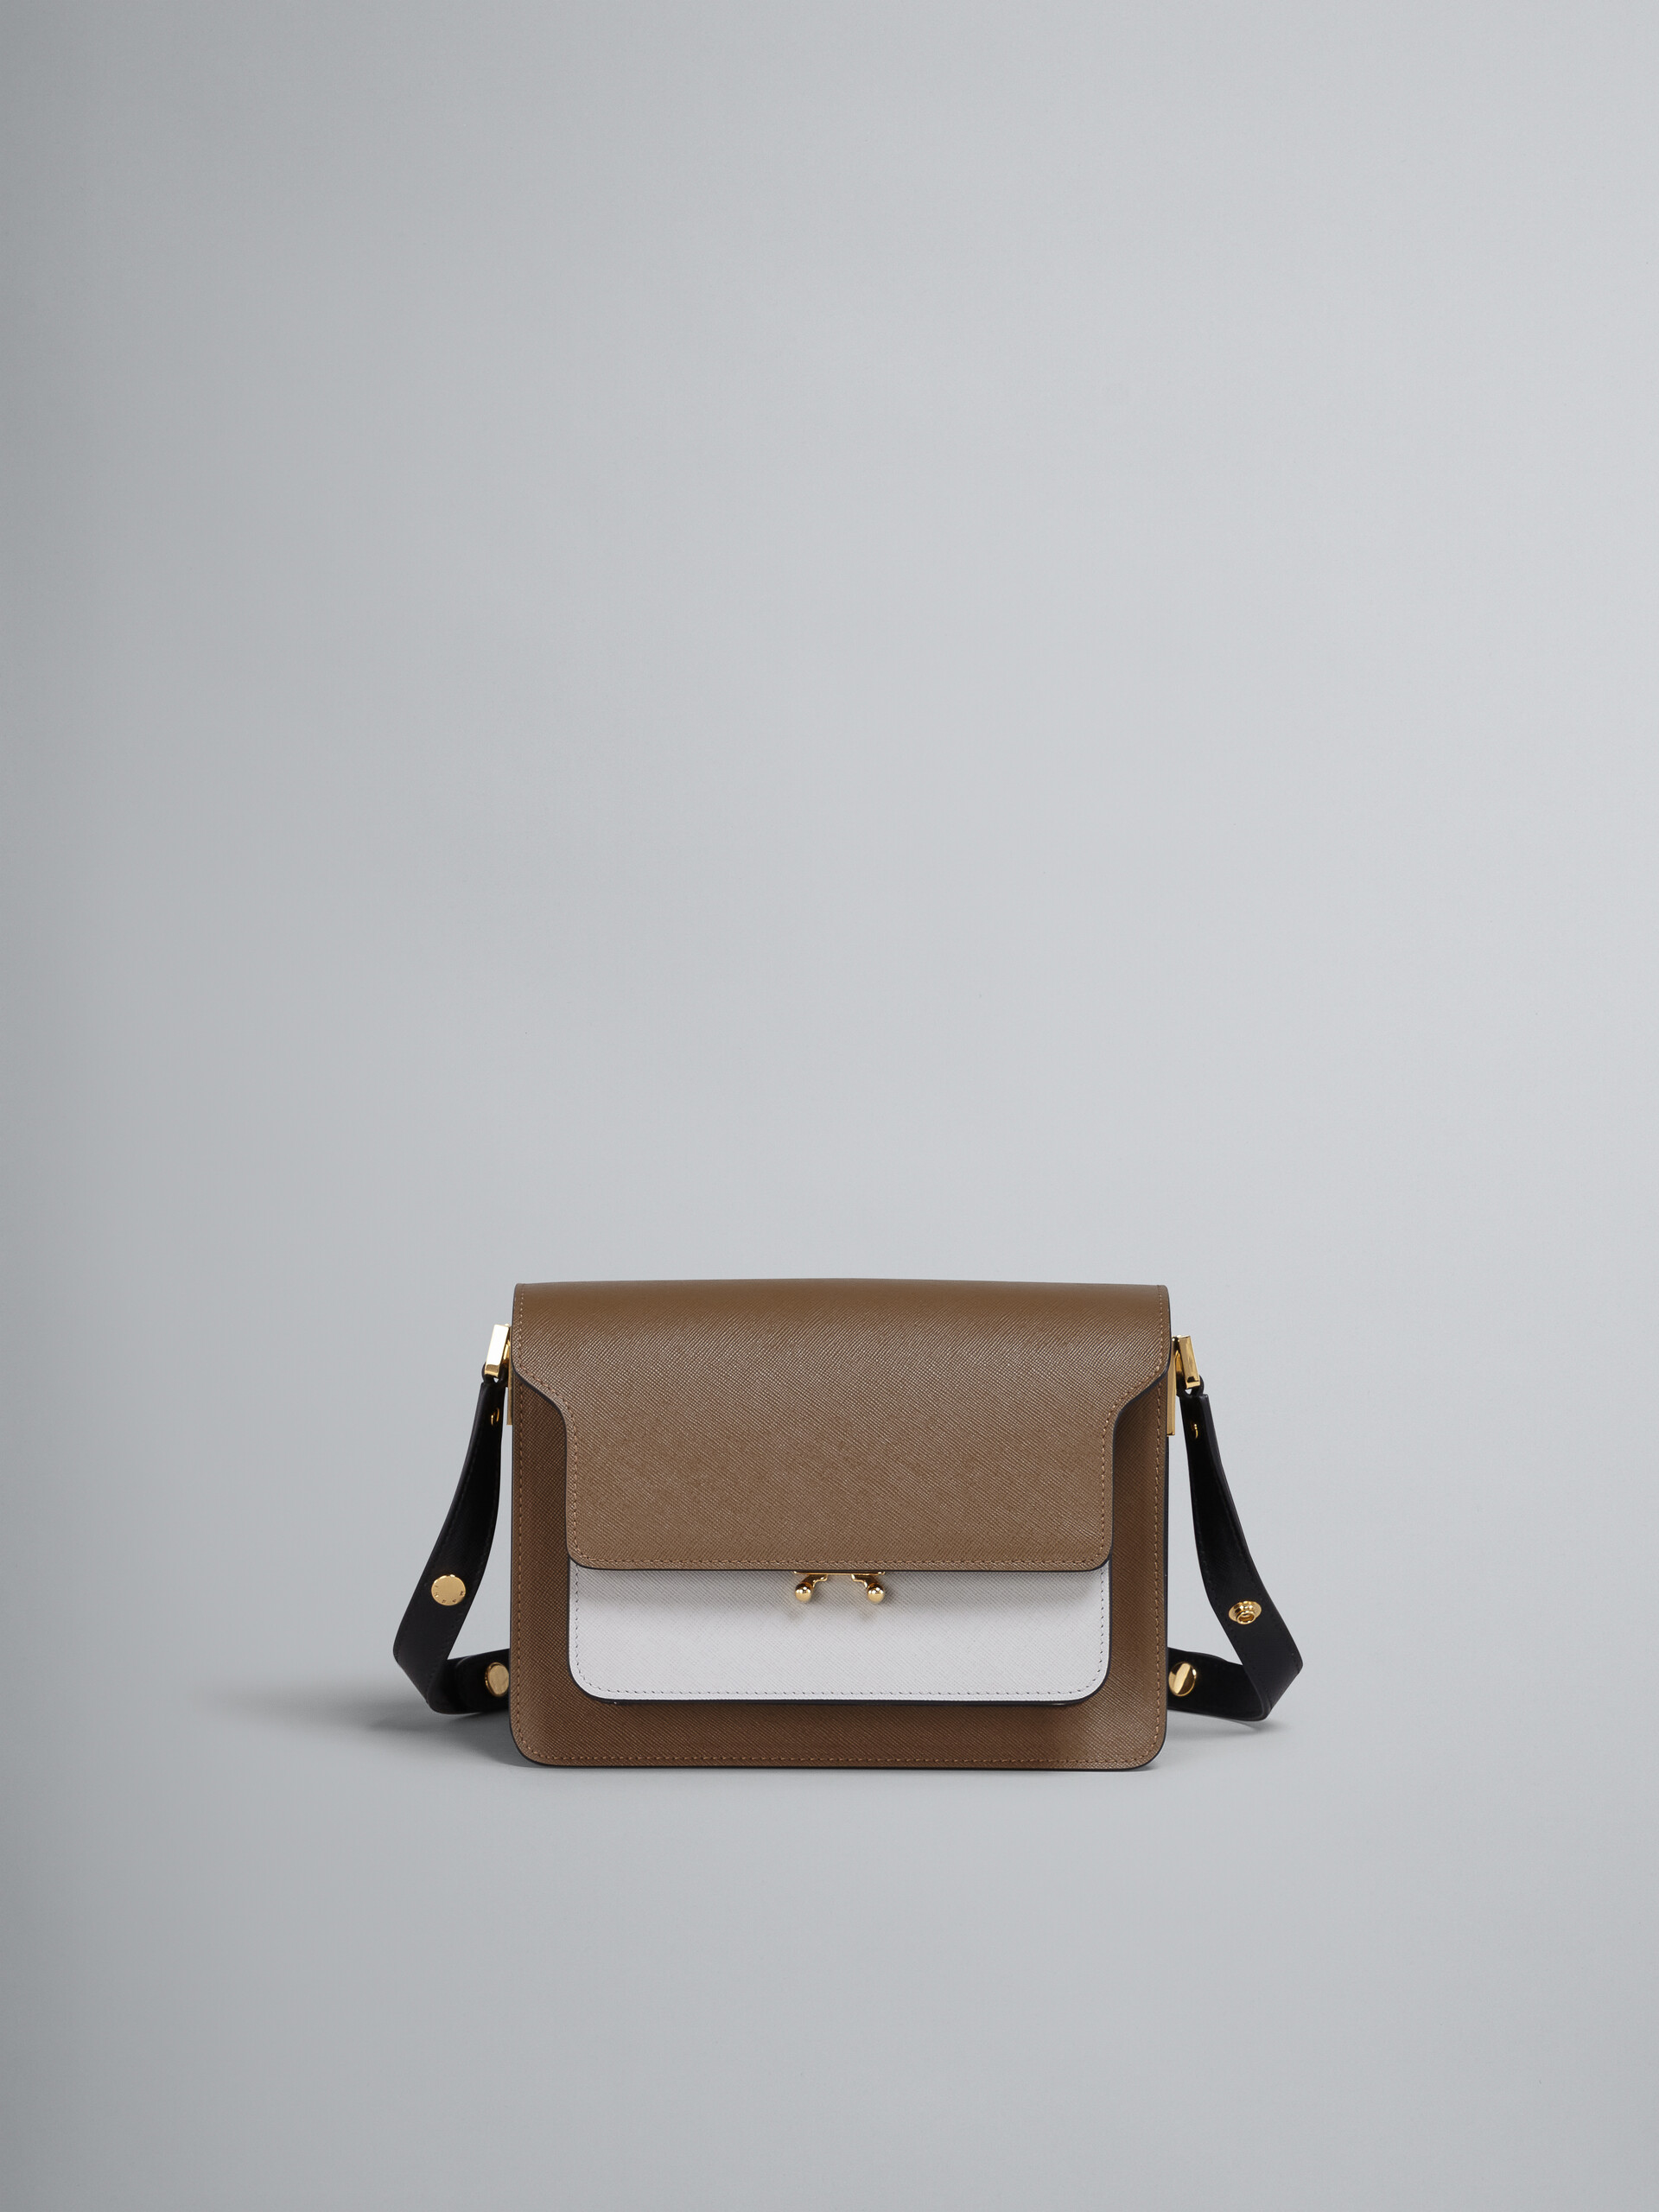 TRUNK medium bag in brown grey and black saffiano leather - Shoulder Bags - Image 1